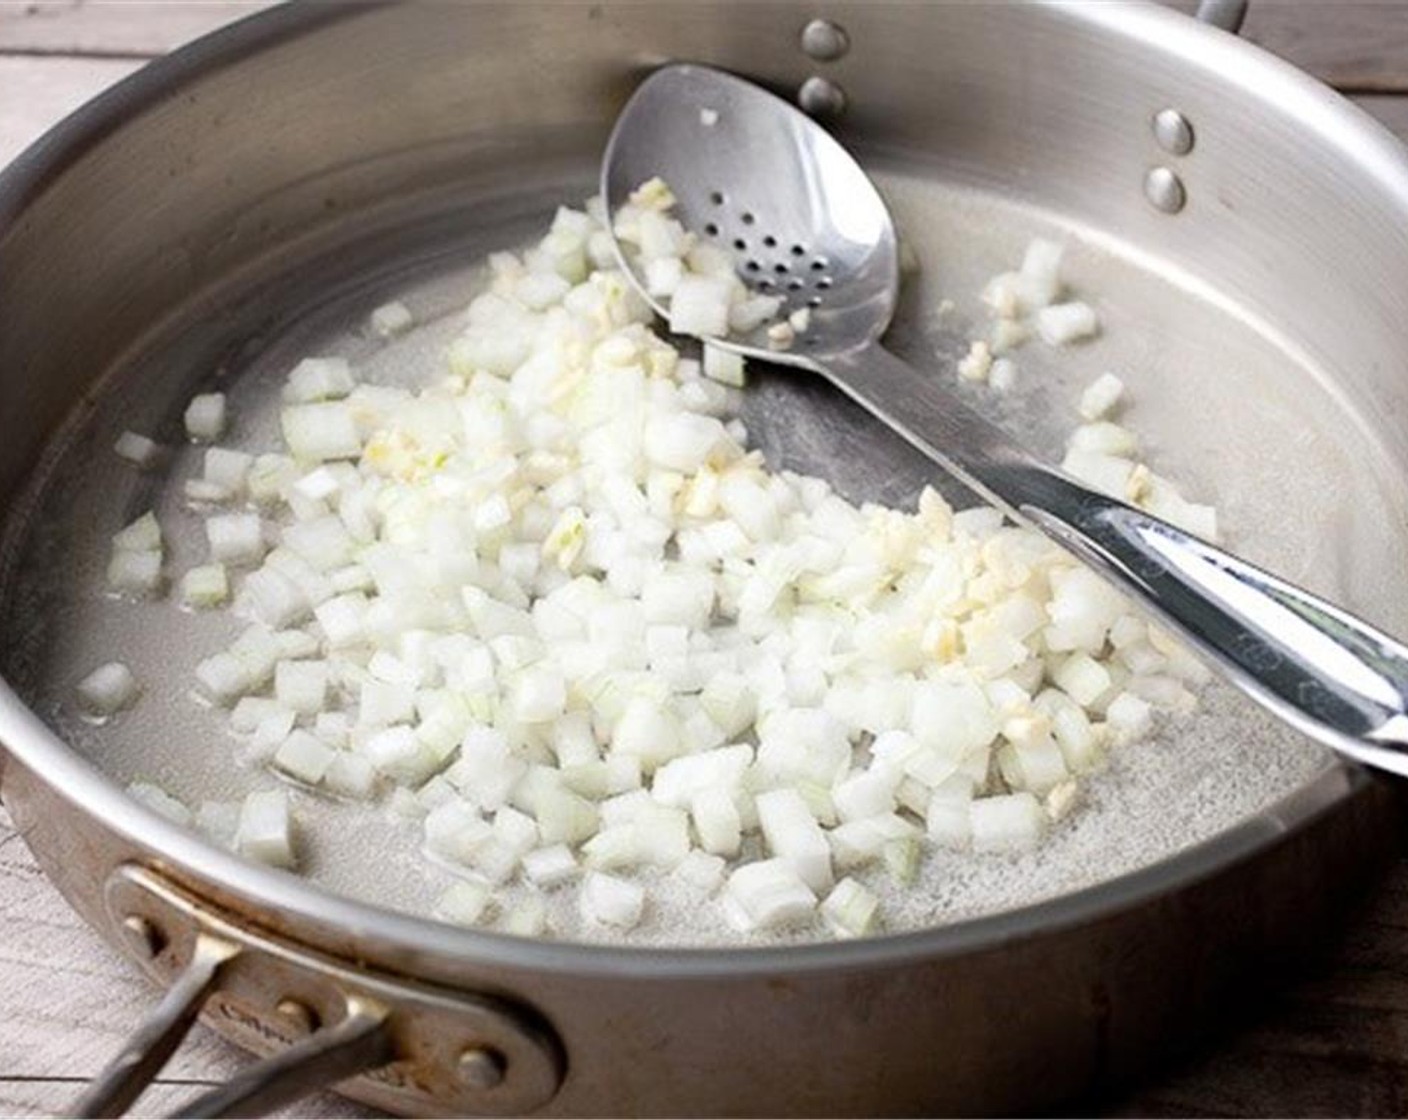 step 3 To start the risotto, cook White Onion (1/2) and Garlic (4 cloves) in Butter (2 Tbsp) over medium heat until soft.